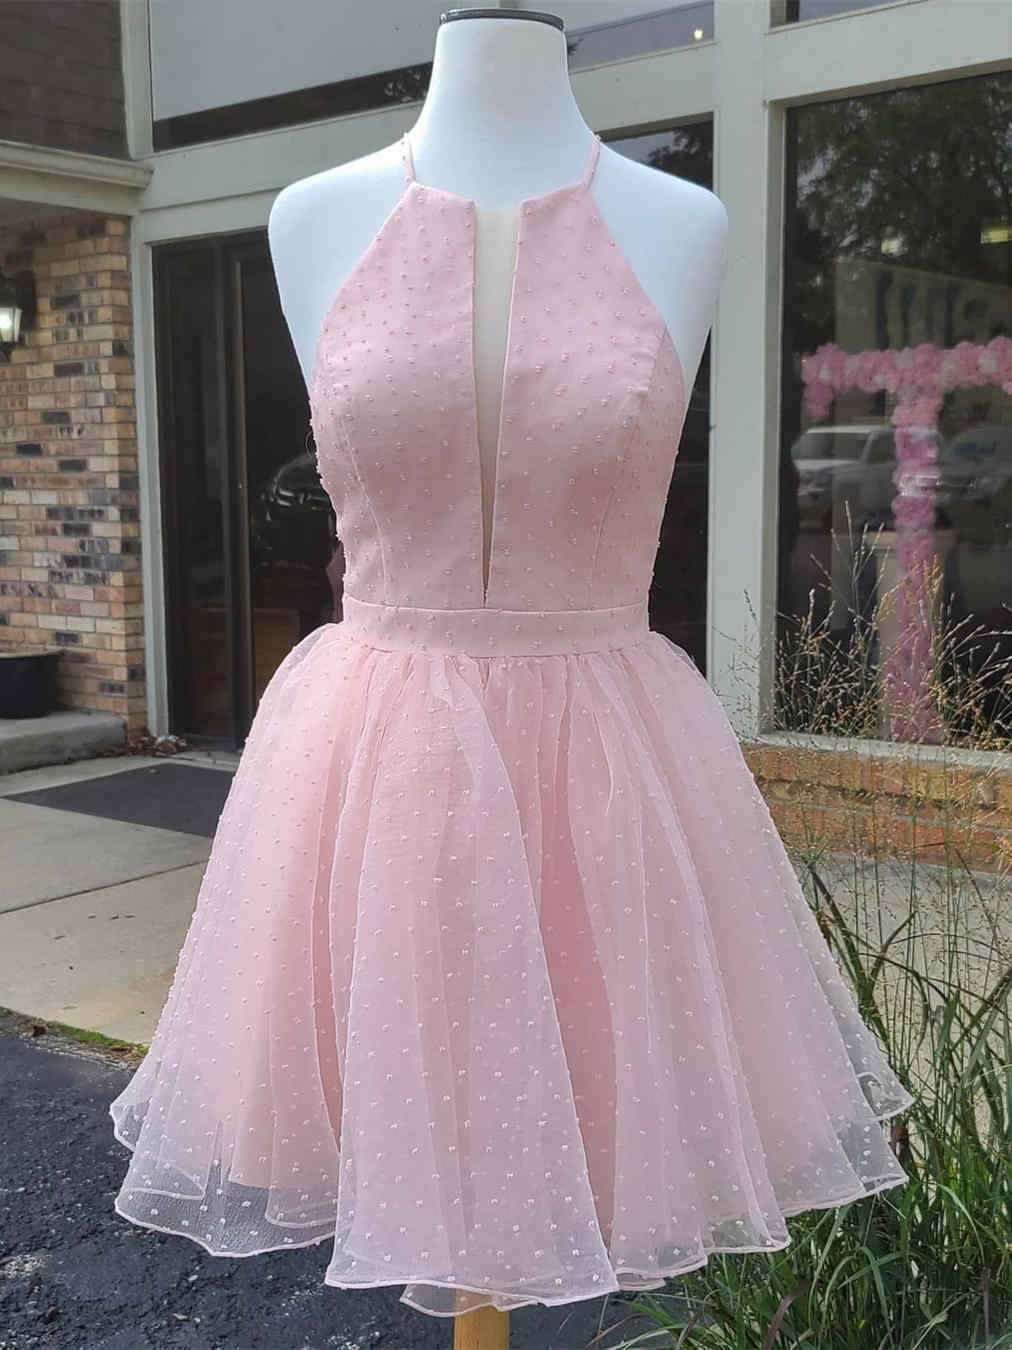 Cute Halter Pink Homecoming Dress with Dot Antinode Cute Halter Pink Homecoming Dress with Dot Antinode cheap homecoming dress,homecoming dress 2020,short party dress,pink dress,dress with dot antinode